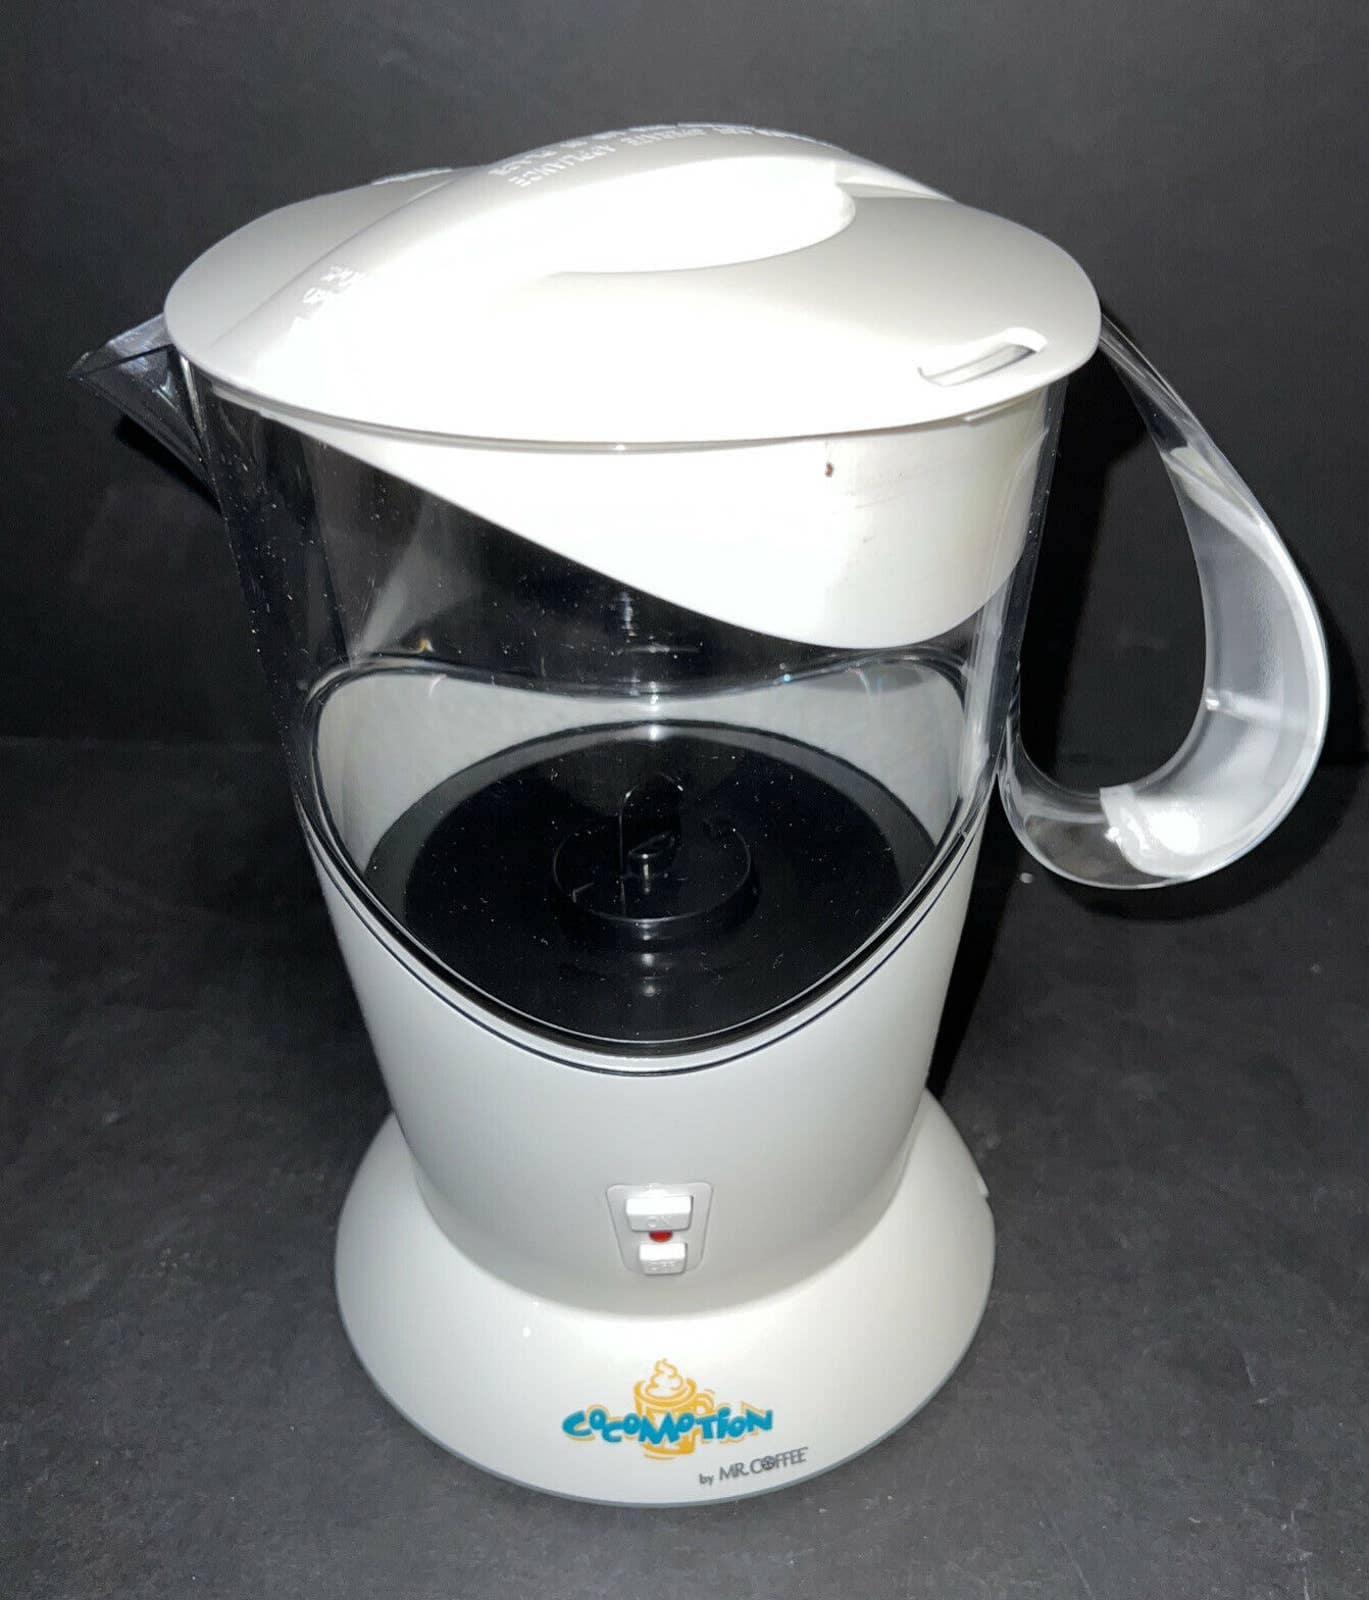 NEW Mr. Coffee Cocomotion 4 Cup Automatic Hot Chocolate Maker in